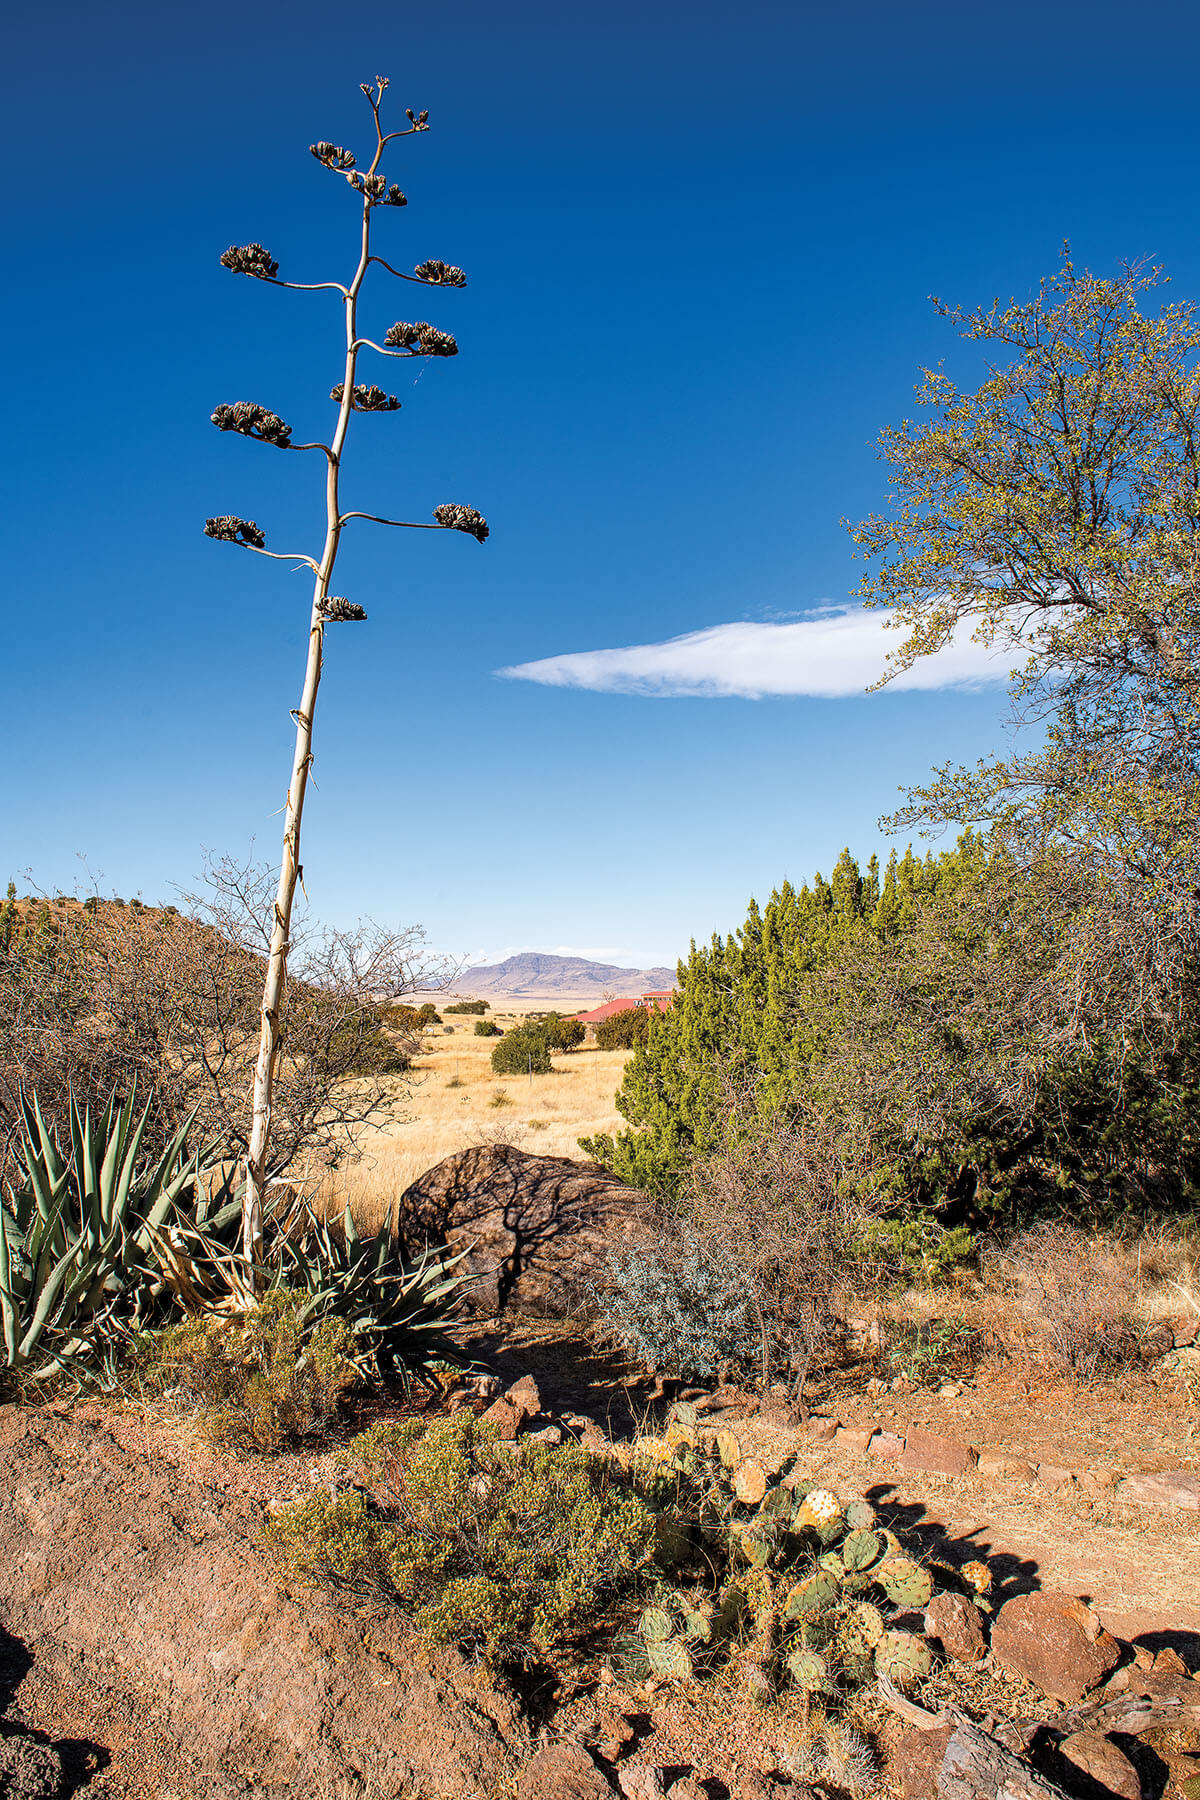 A tall Century Plant reaches for the sky from the desert floor in front of blue sky